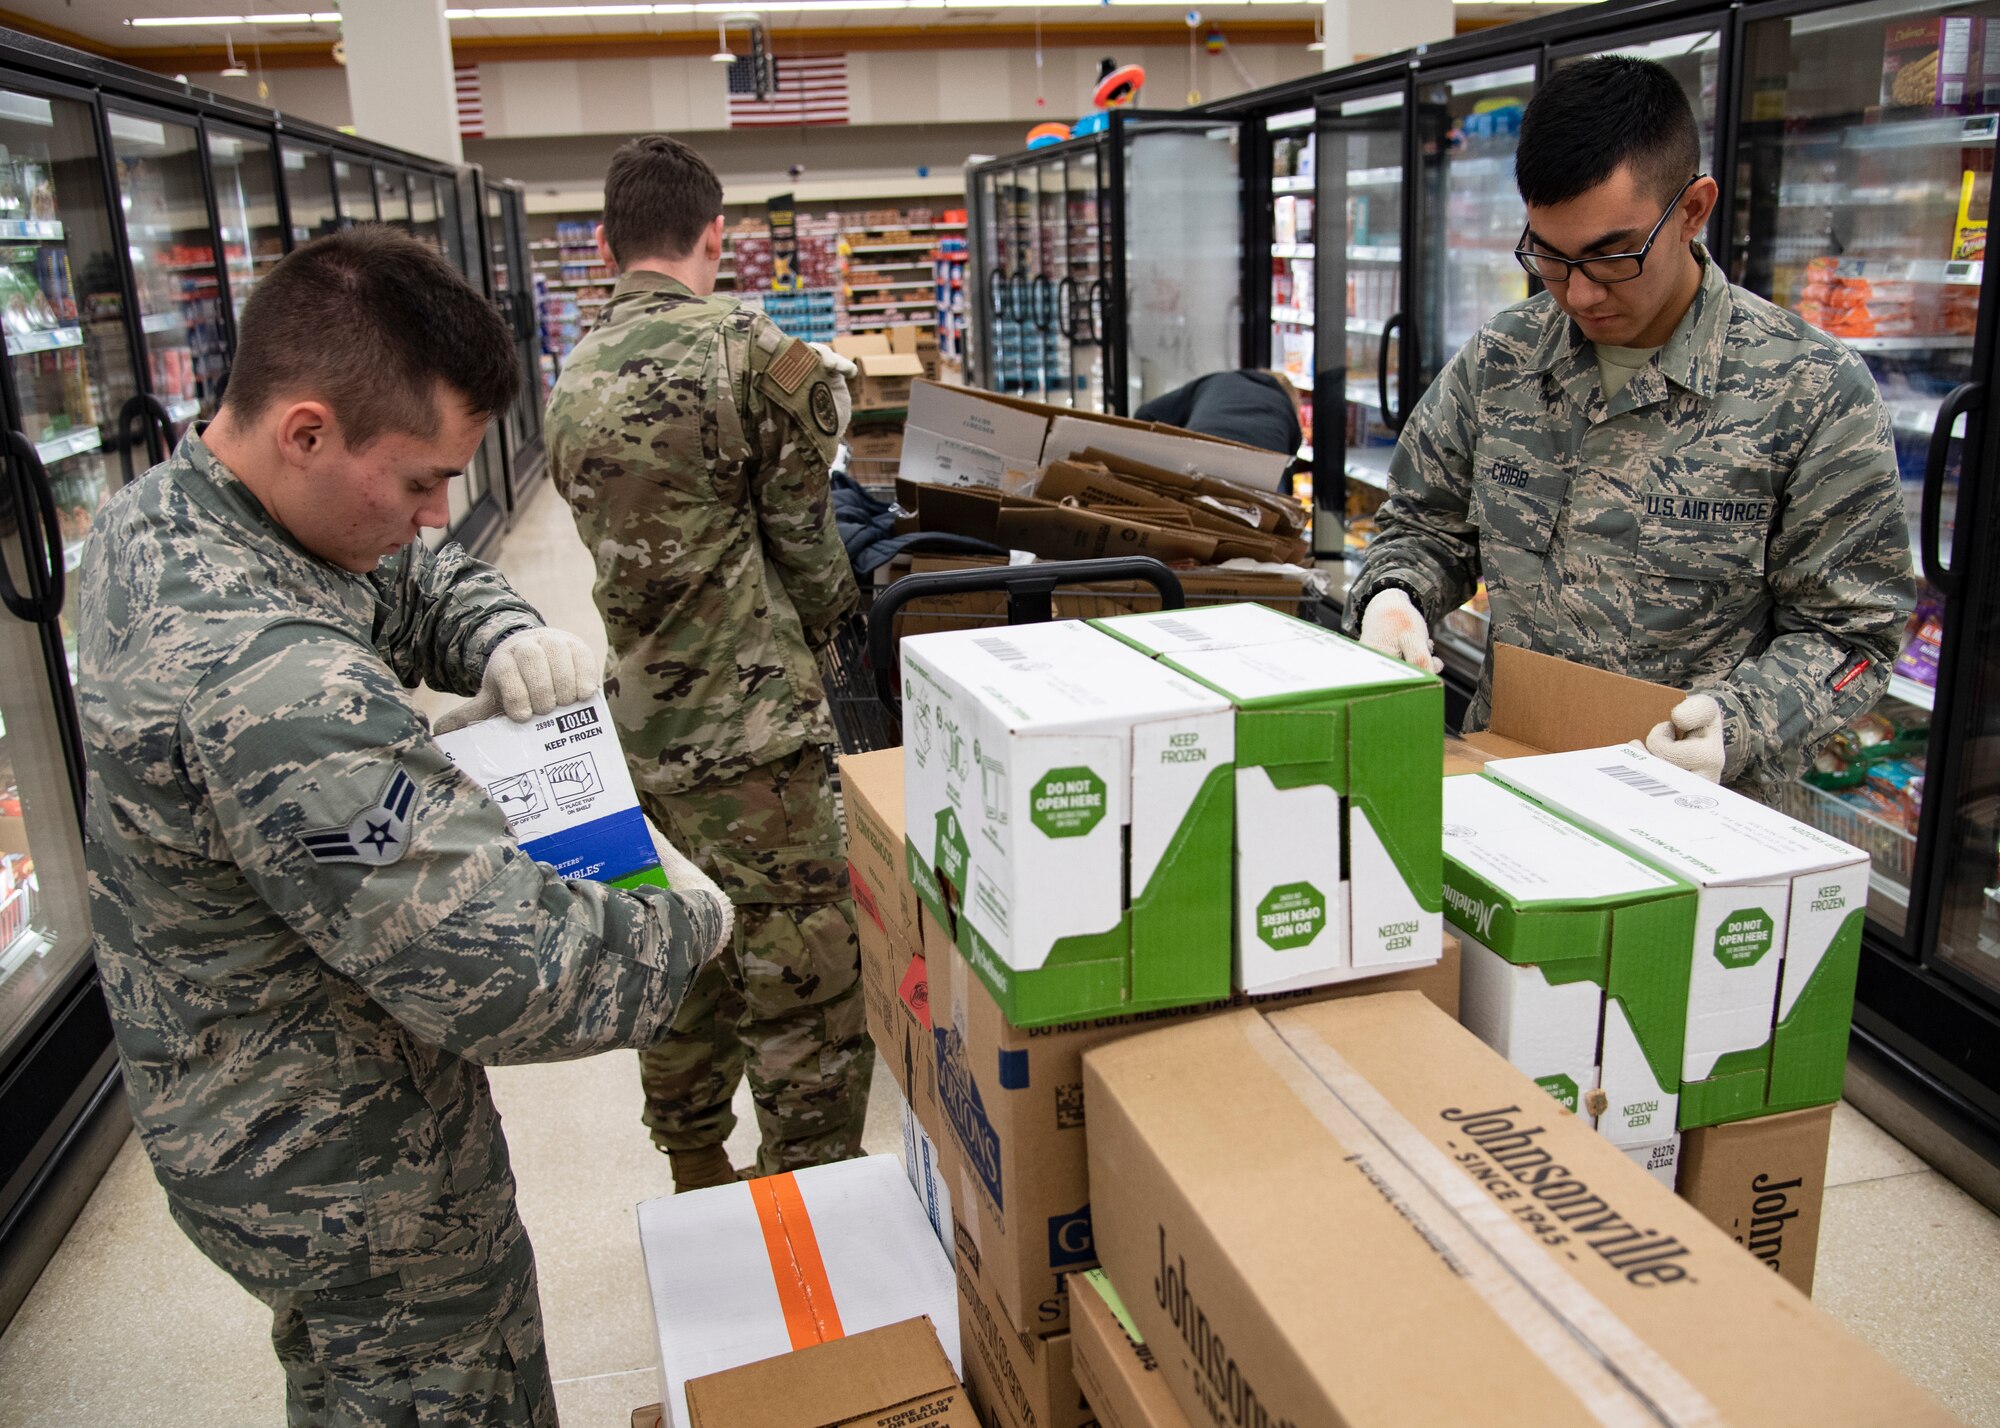 From left, Airman 1st Class Kyle Mason, Airman Bryce Jones and Airman Jackson Cribb, 362nd Training Squadron crew chief apprentice course students, help stock shelves at Sheppard Air Force Base, Texas, April 2, 2020. On March 25, 2020 all Department of Defense commissaries and other facilities were deemed mission essential. To help out those who work the hardest to supply the base, these Airmen in Training were sent from their squadrons to help with what they could. (U.S. Air Force photo by Senior Airman Pedro Tenorio)